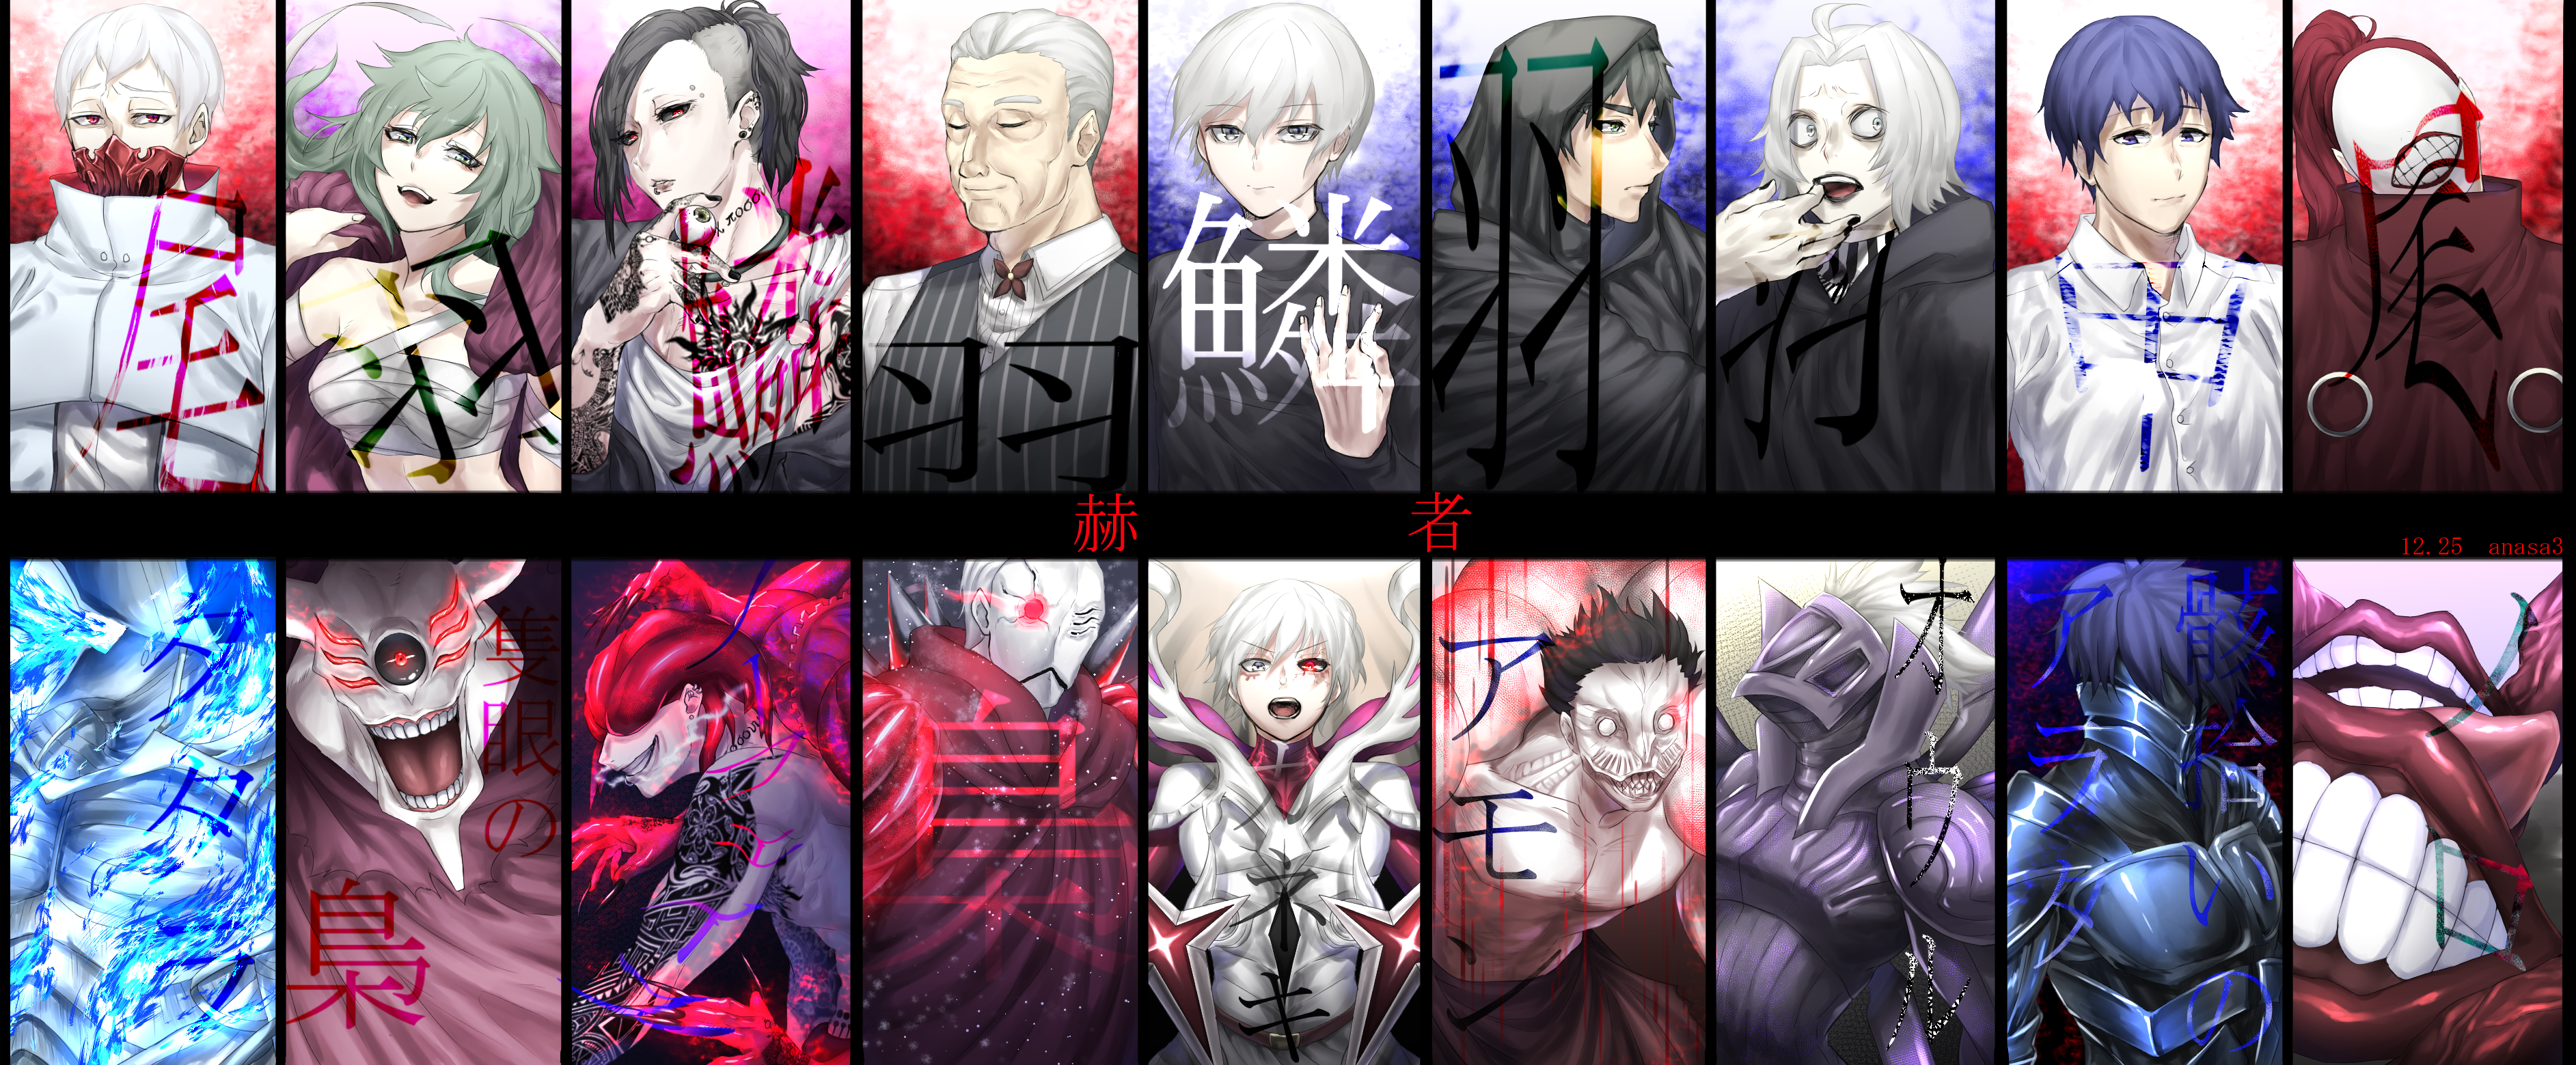 Anime Tokyo Ghoul:re HD Wallpaper by anasa3